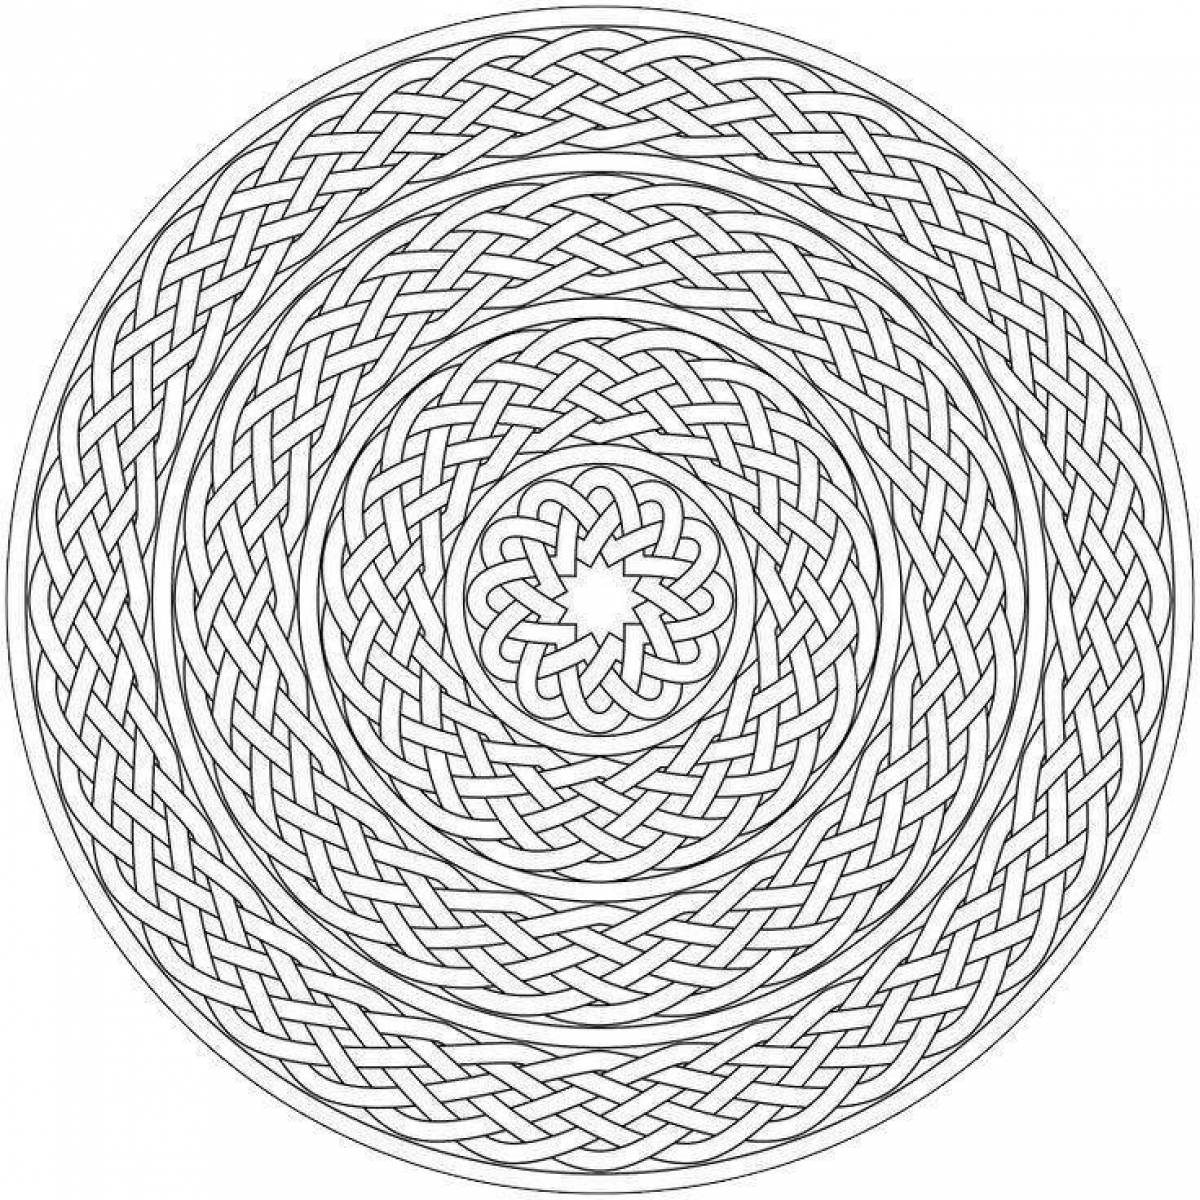 Coloring page with a tempting circular pattern